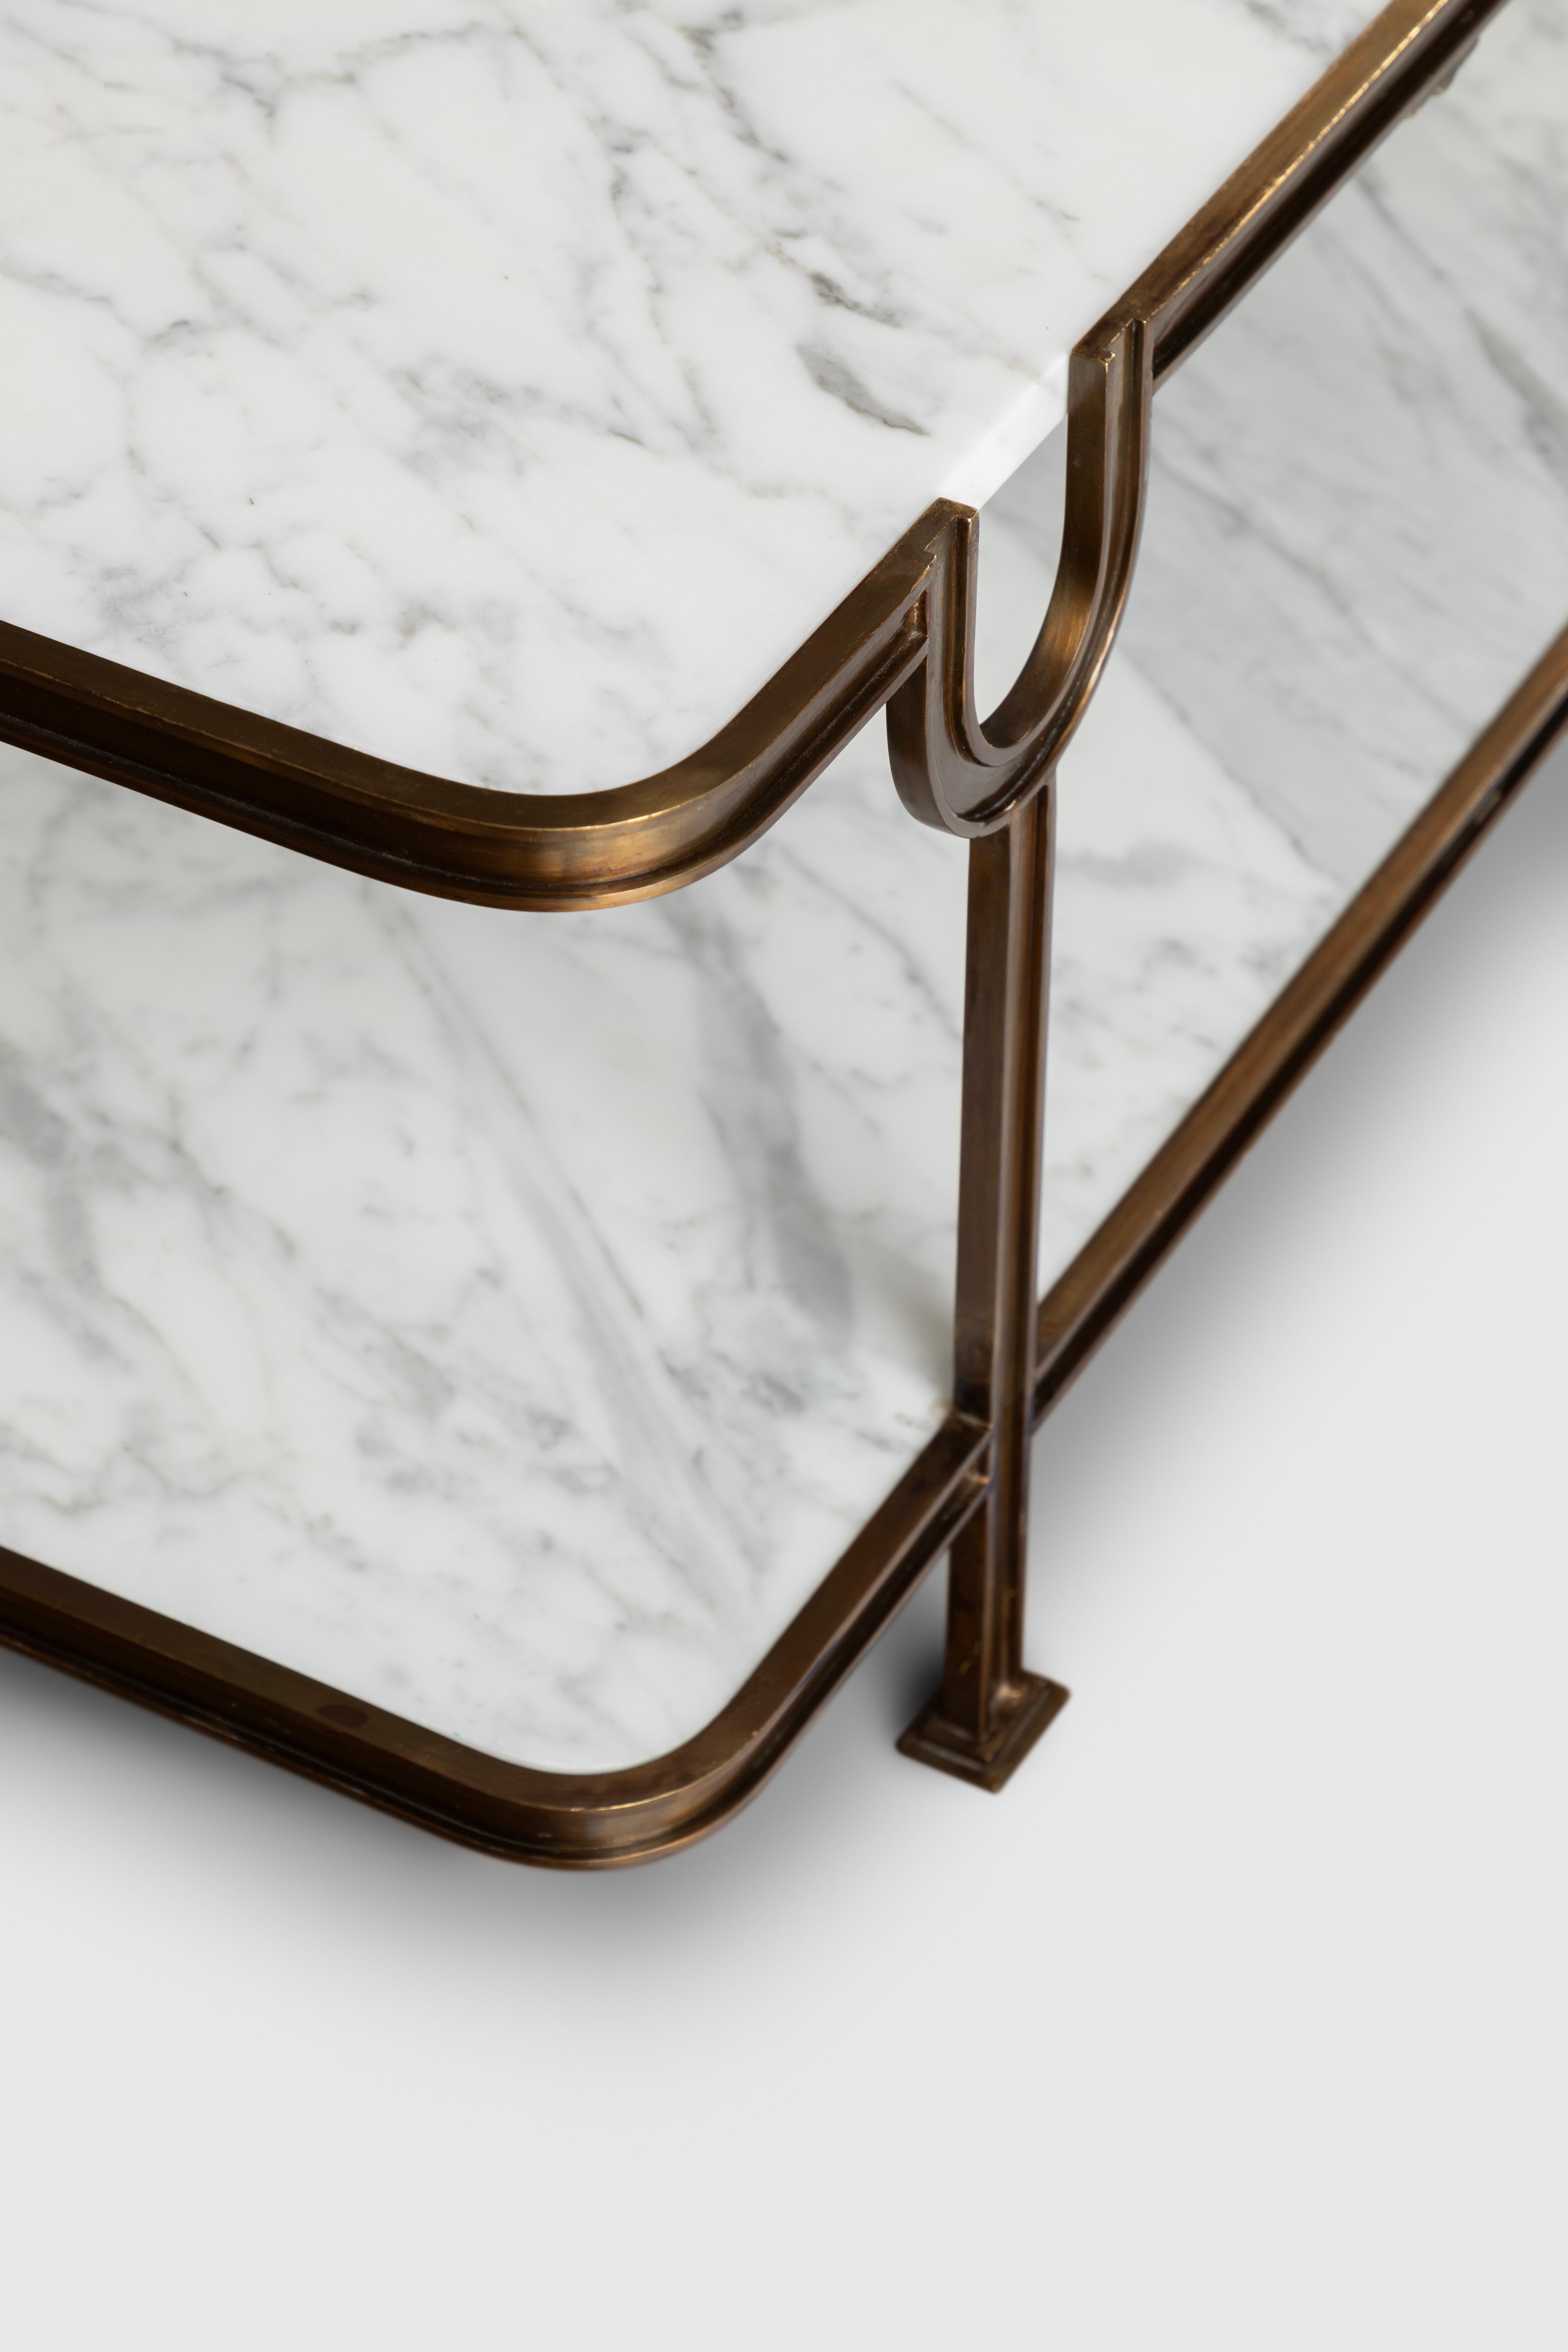 The Vendôme coffee table is made out of bronze and two thick marble covers. It represents our passion for forged bronze and work. It takes a lot of time and effort for the artisans to create the delicate borders and shapes of this design. In order